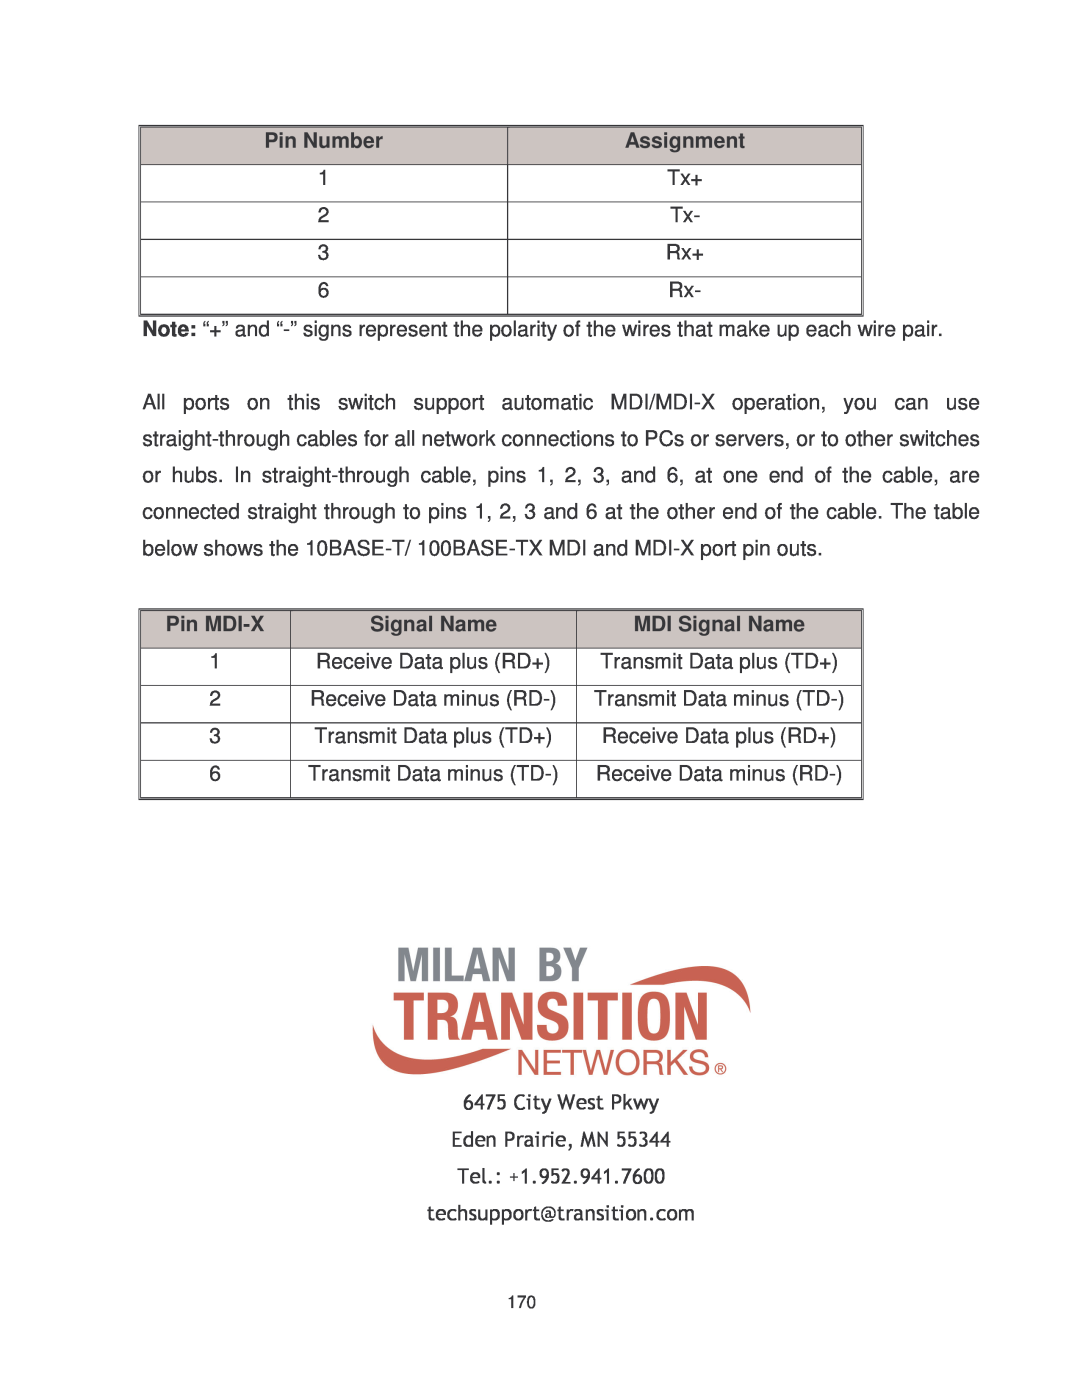 Transition Networks MIL-SM2401MAF manual City West Pkwy Eden Prairie, MN Tel. +1.952.941.7600, techsupport@transition.com 